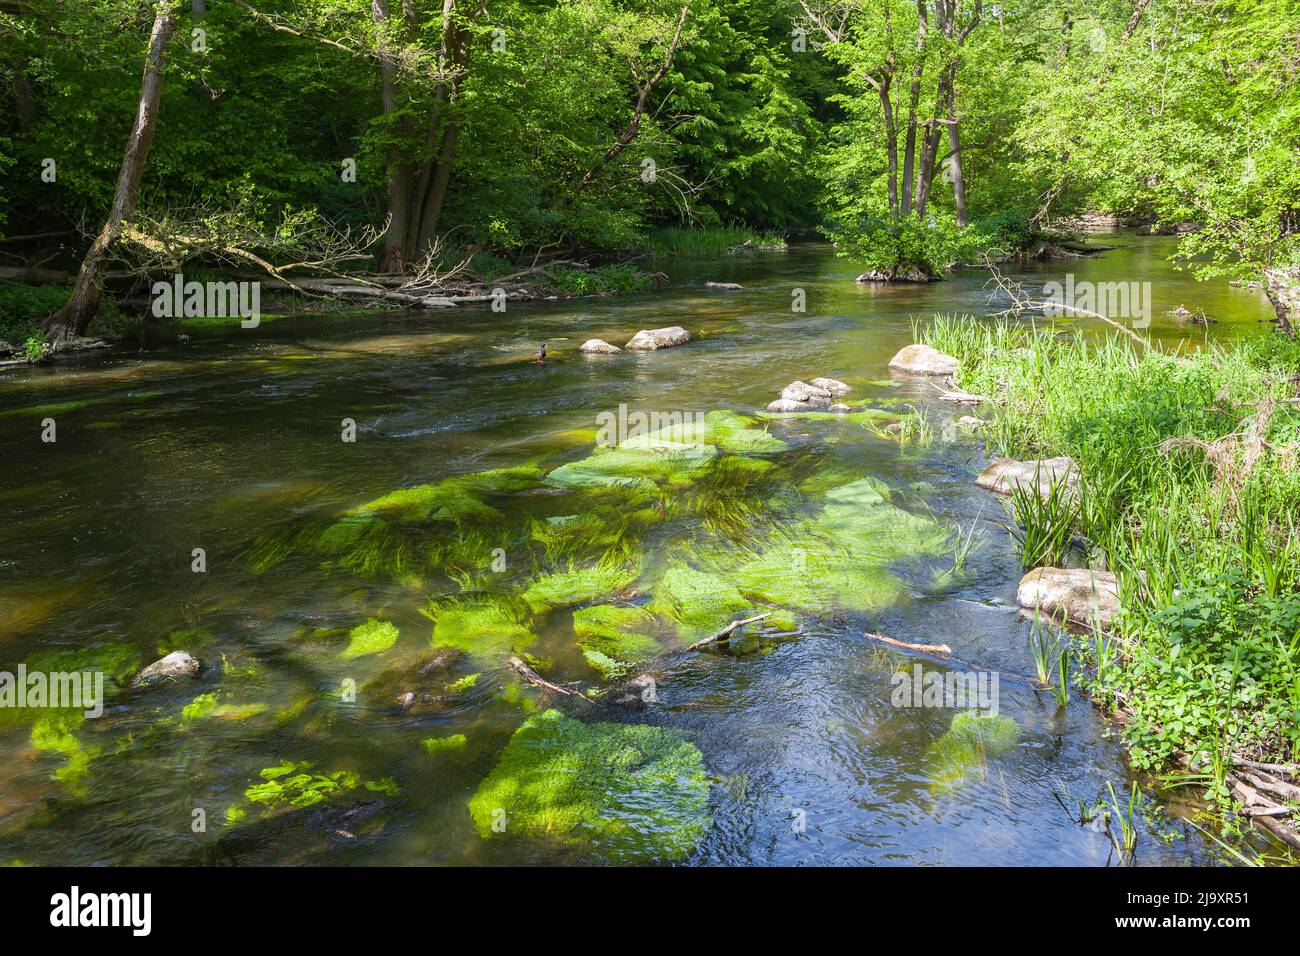 Idyllic natural river habitat with duck, aquatic plants and clear water at forest valley Stock Photo